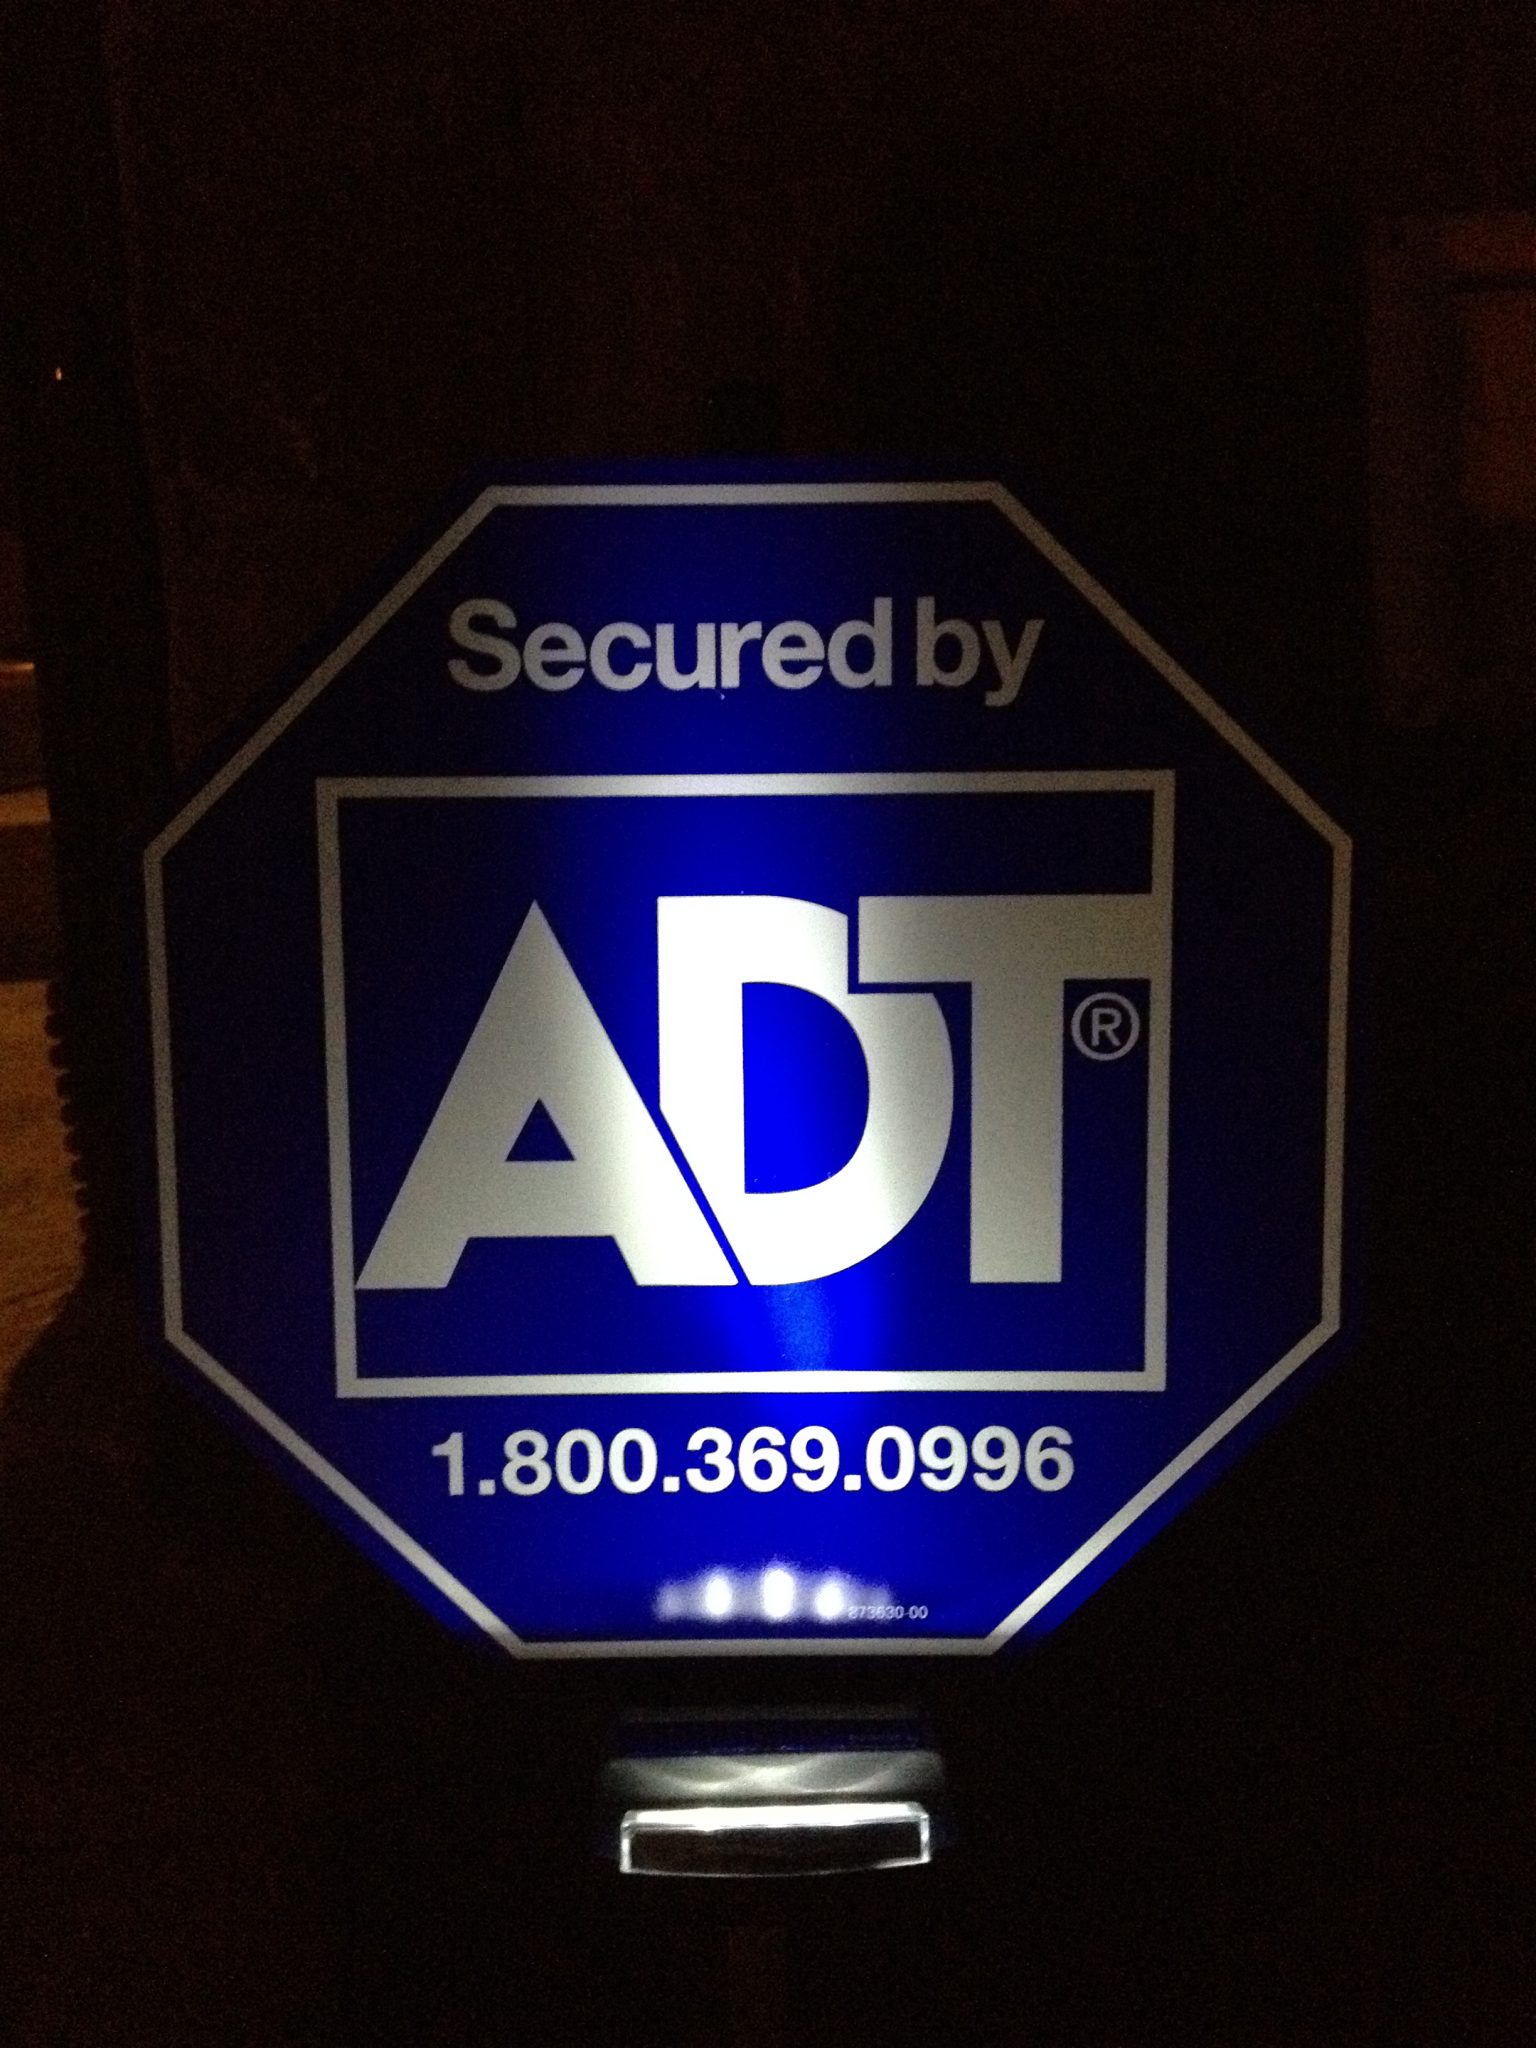 ADT Reviews | 2016 Buyers Guide for an ADT Pulse Alarm System